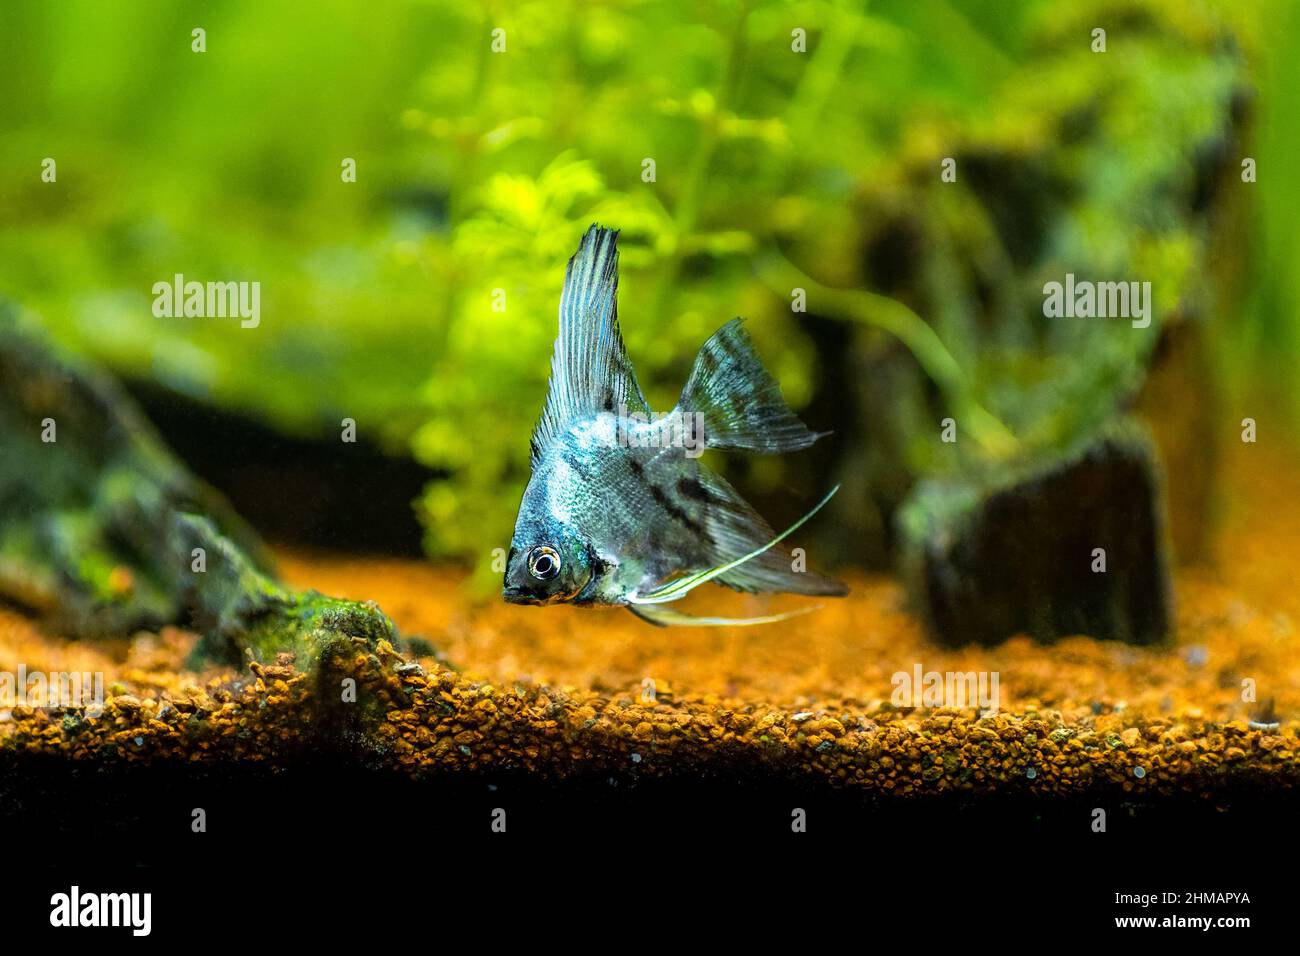 Blue angelfish in tank fish with blurred background (Pterophyllum scalare) Stock Photo